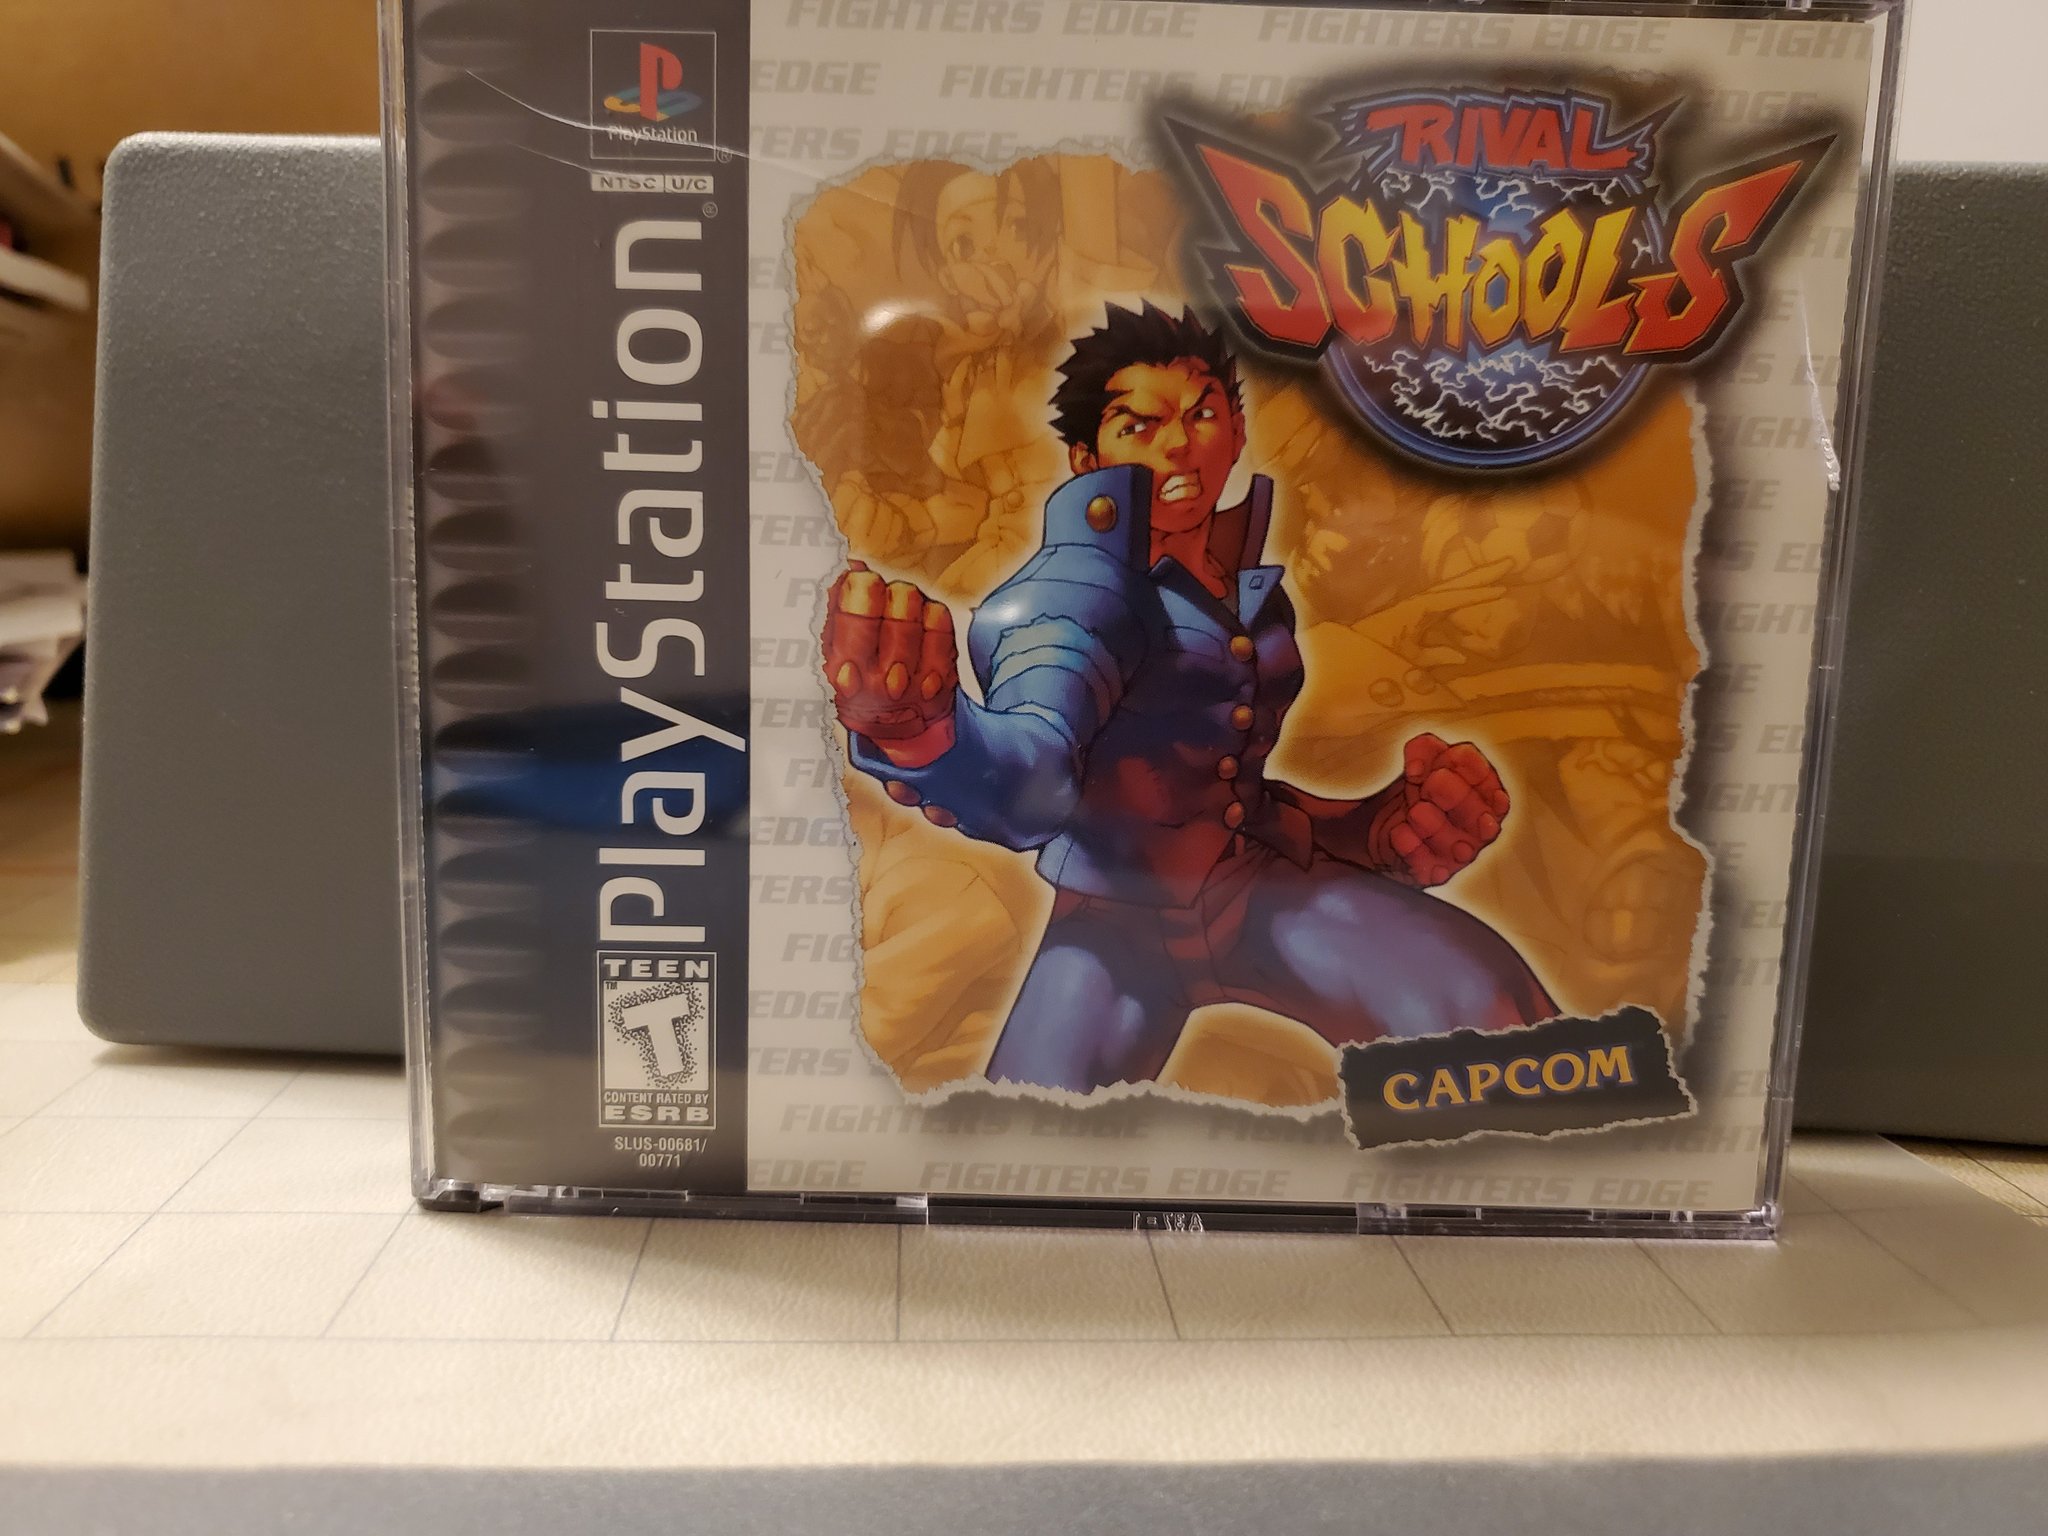 RebirthofSlick on Twitter: "Rival Schools for PS1 released in 1998.  Fantastic 3D fighting game. Arcade was released in 1997. Sakura from Street  Fighter is also in the game. #videogames #videogamecollecting #RETROGAMING  #retrogame #